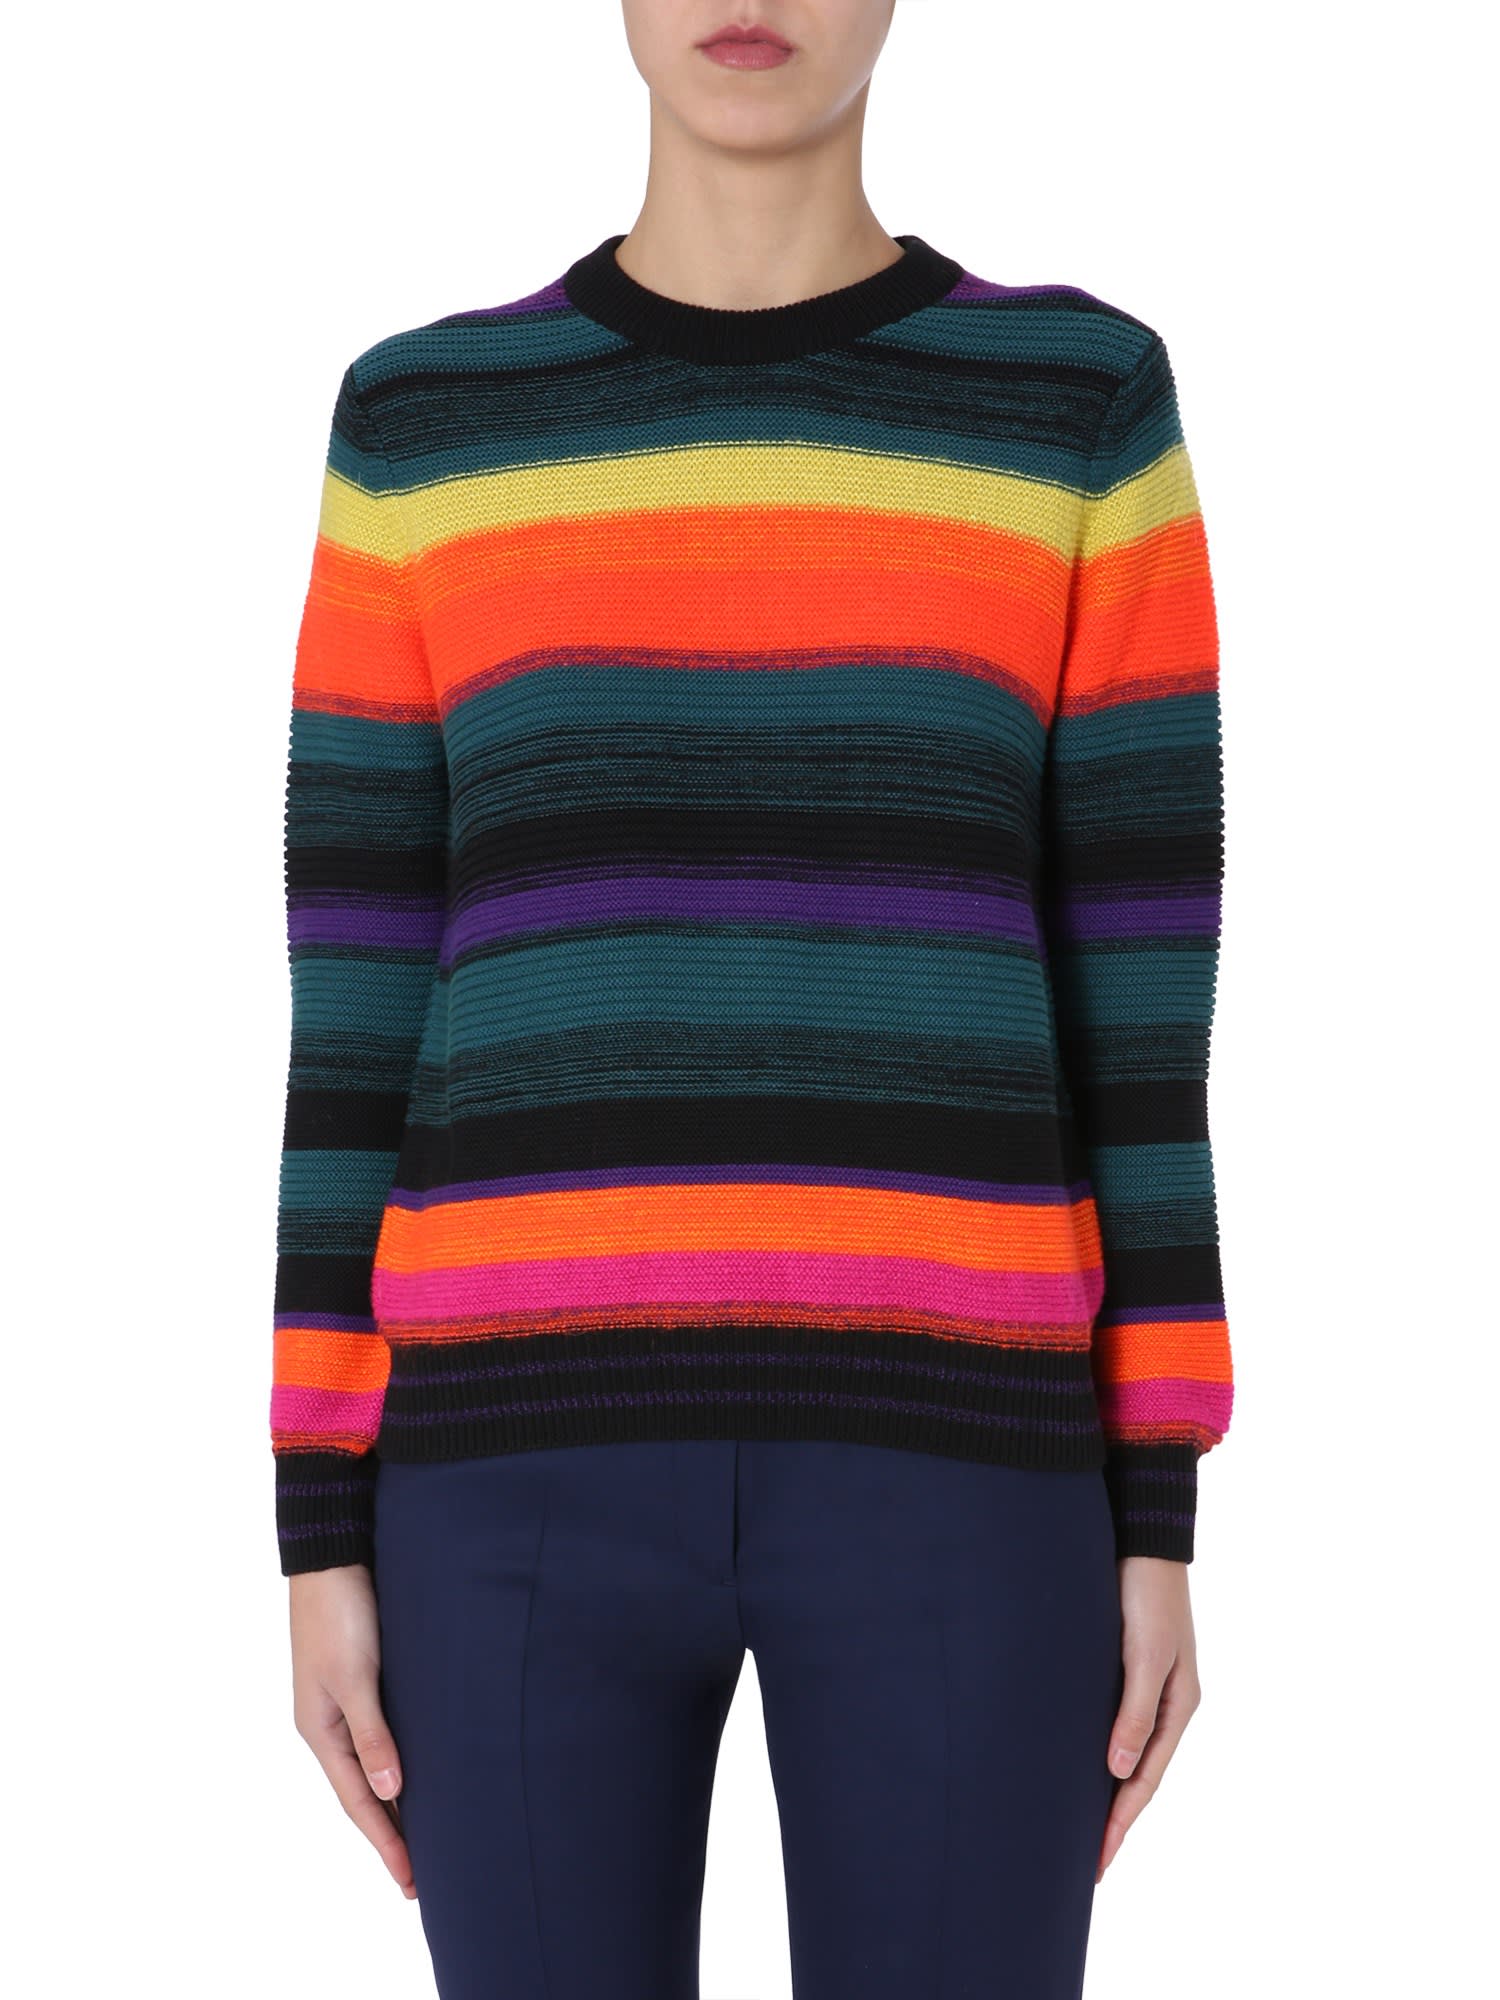 PS BY PAUL SMITH CREW NECK SWEATER,11219969